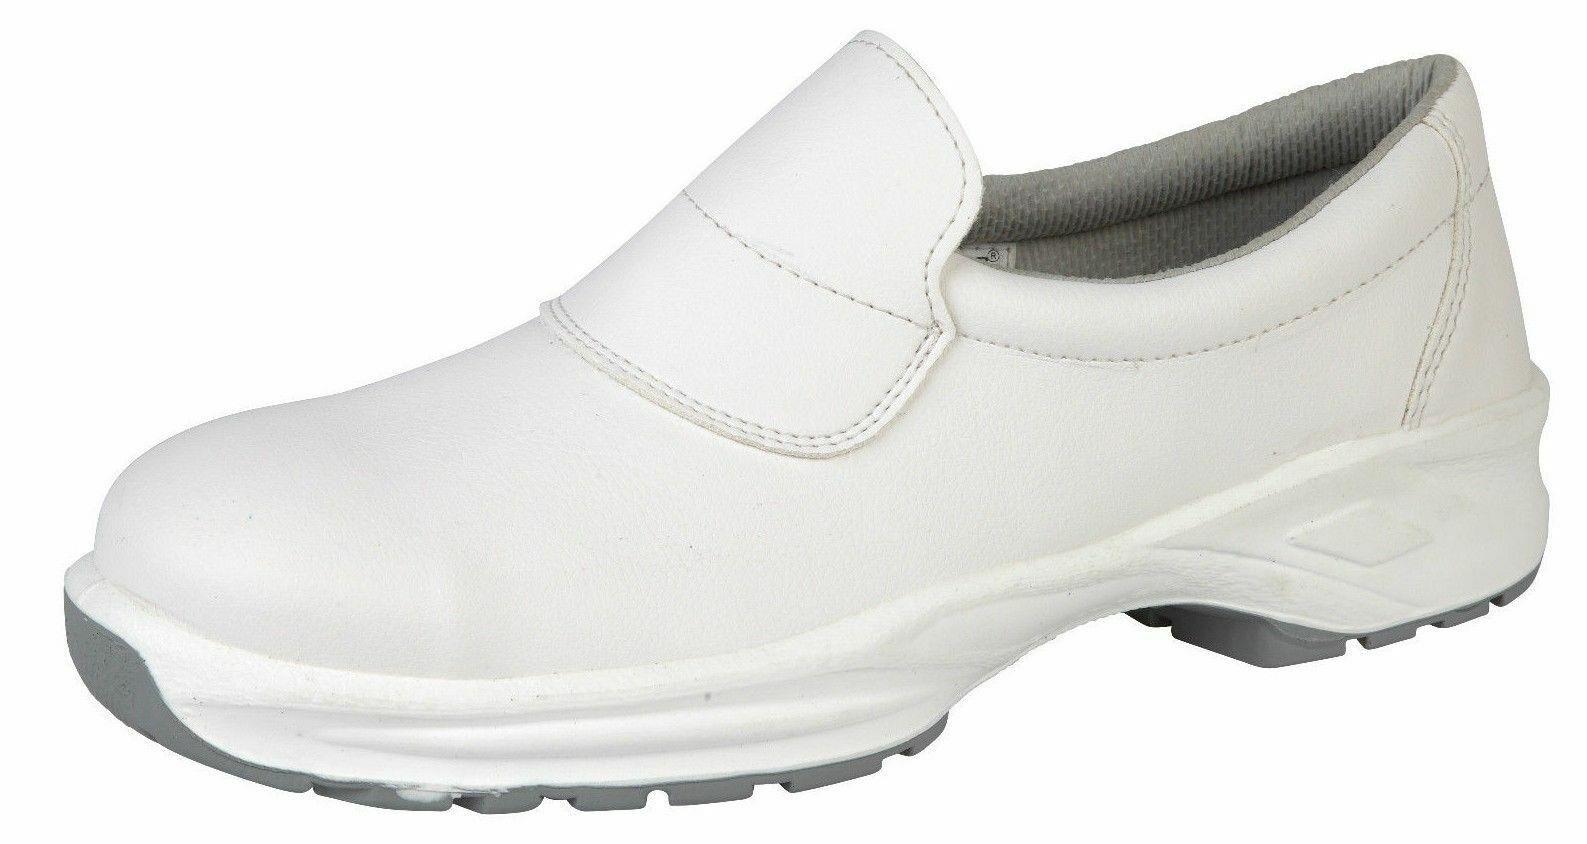 Himalayan S2 white microfibre slip-on food trade steel toe safety shoe #9950